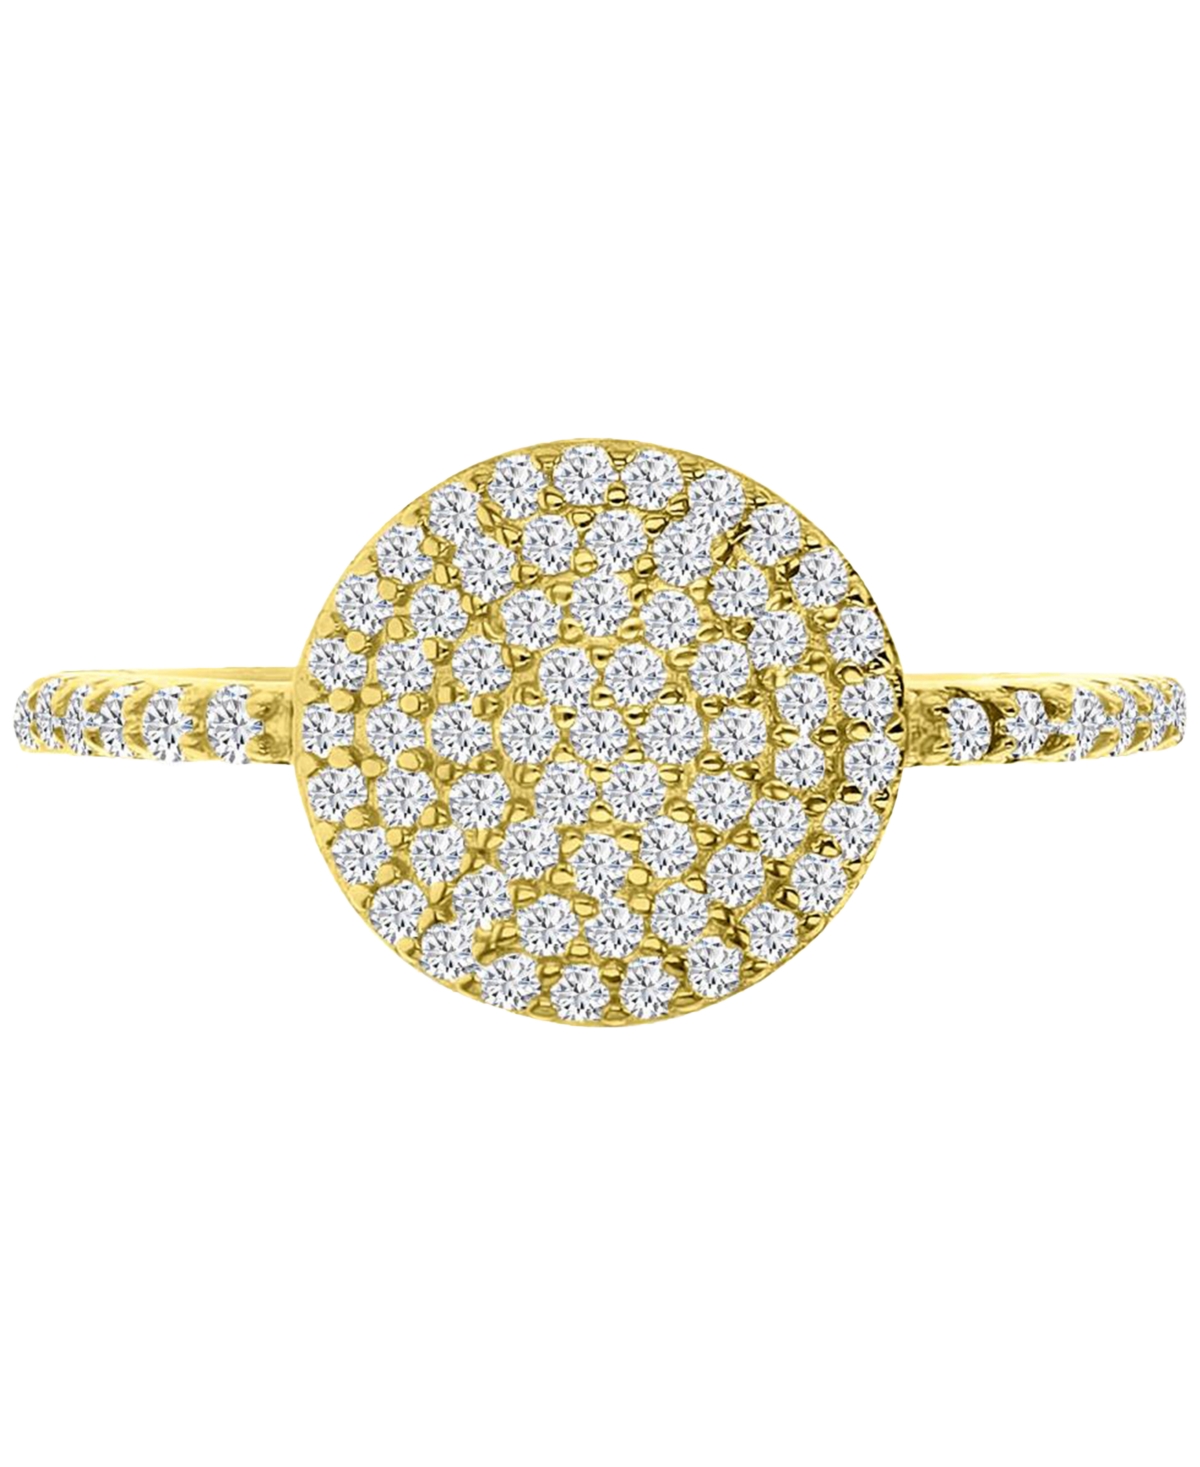 Cubic Zirconia Pave Circle Cluster Ring in 14k Gold-Plated Sterling Silver - Gold